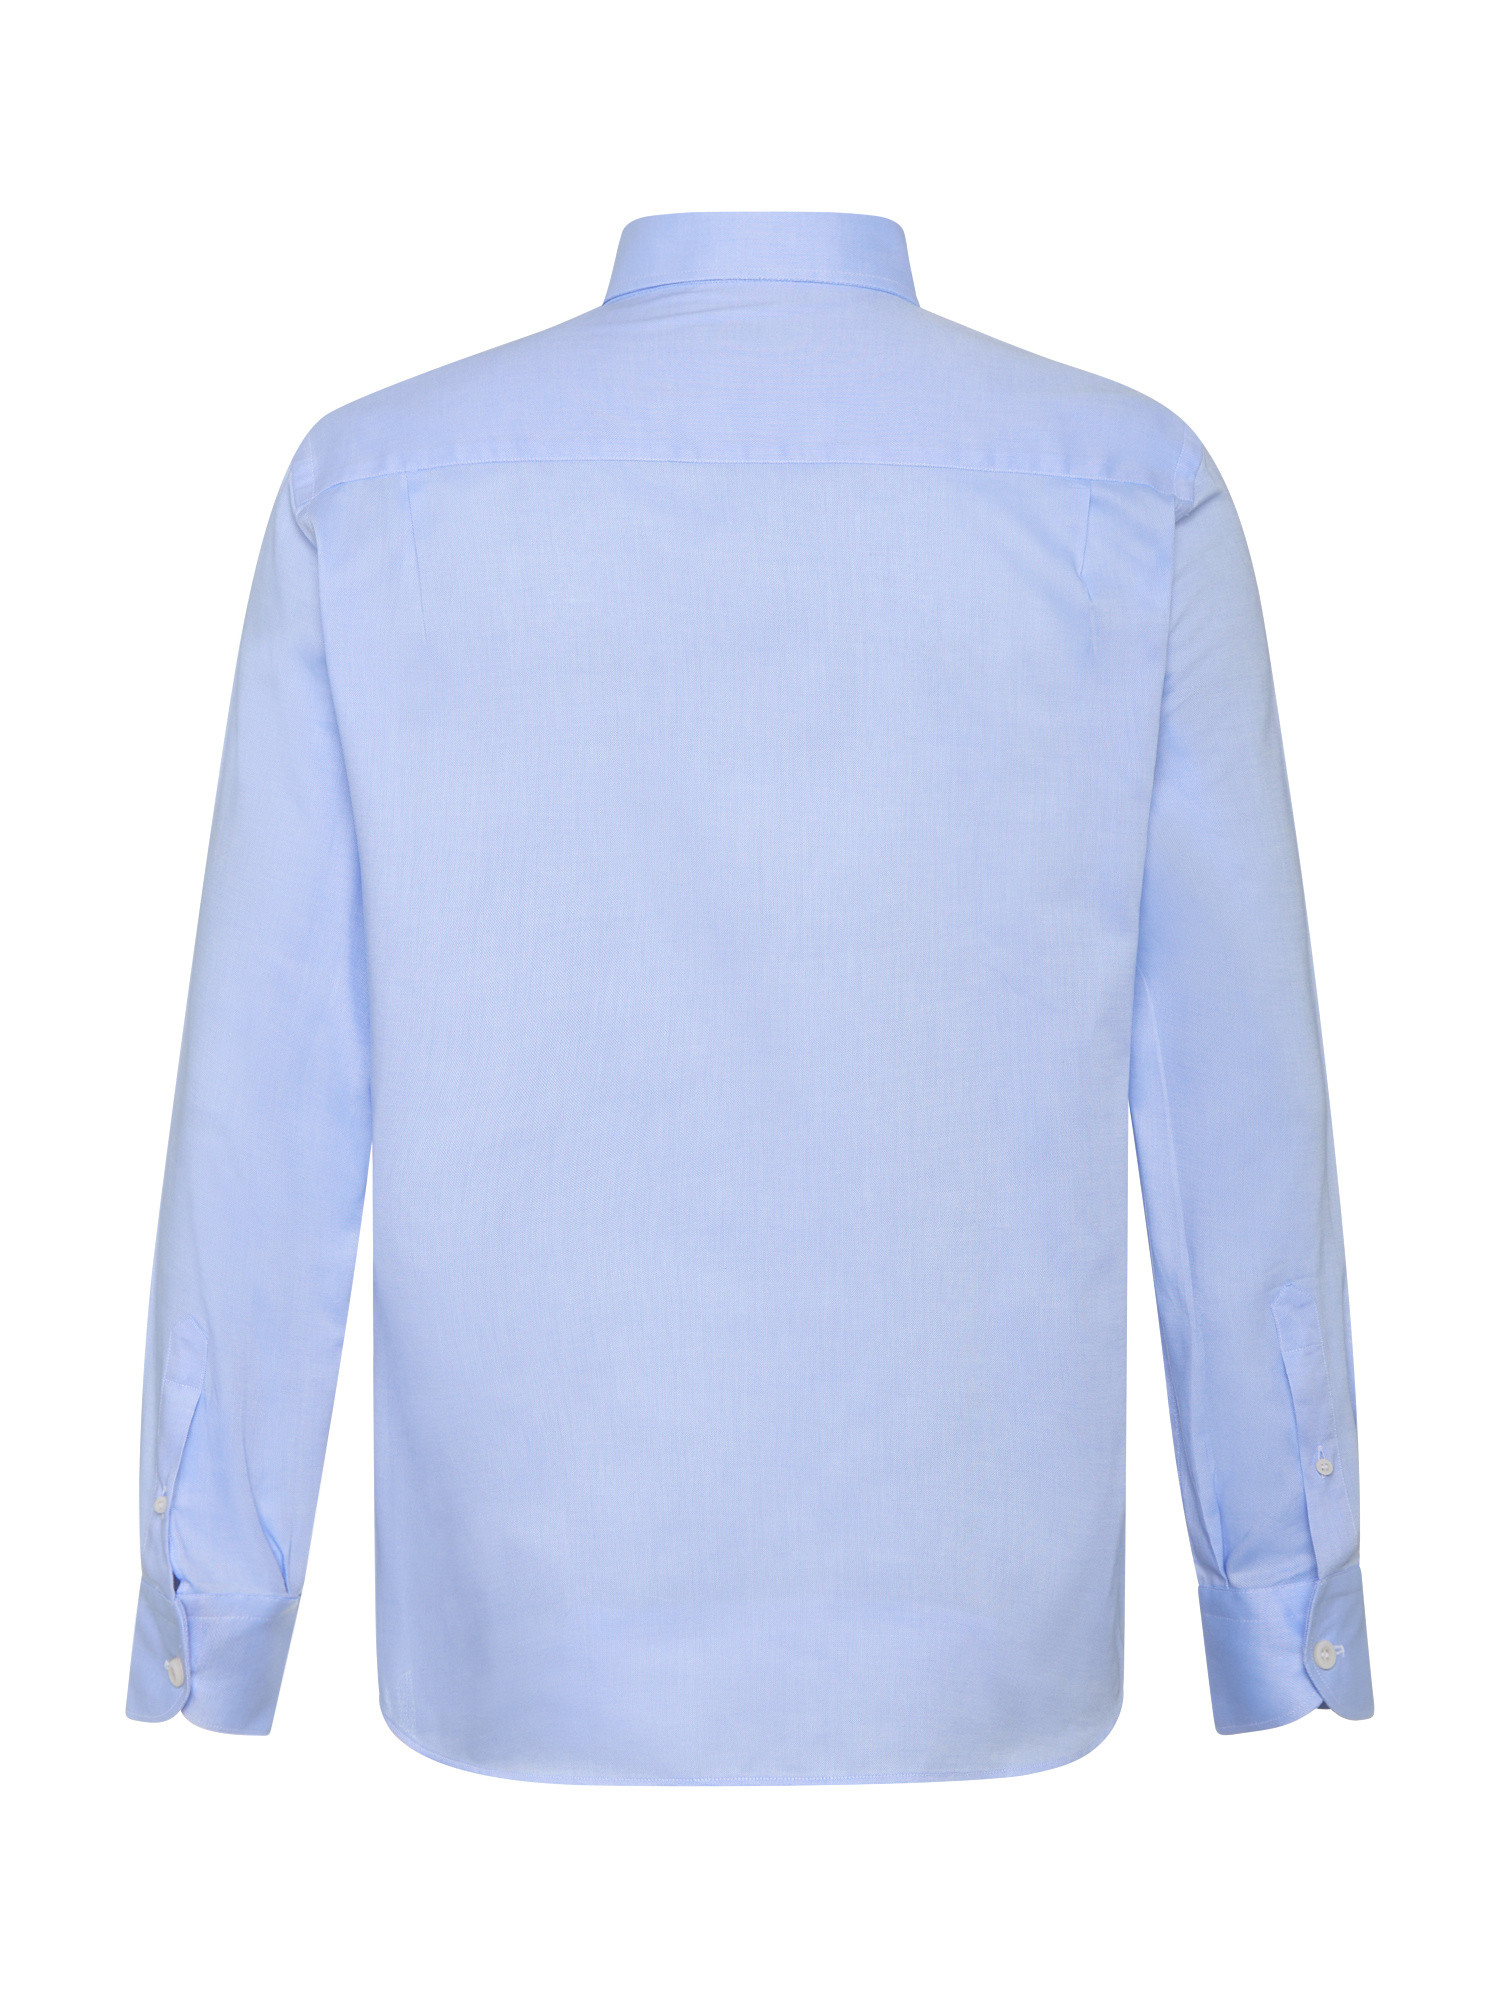 Luca D'Altieri - Regular fit casual shirt in pure cotton oxford, Light Blue, large image number 2